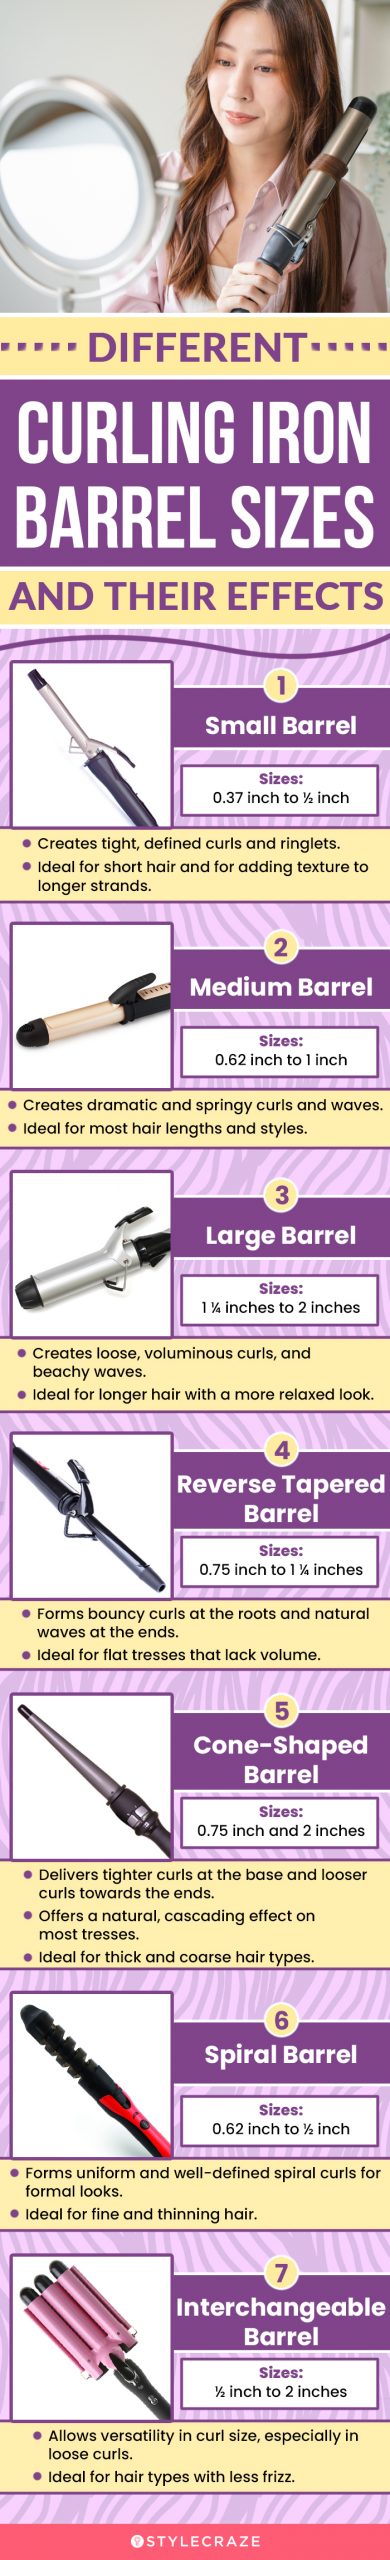 Different Curling Iron Barrel Sizes And Their Effects (infographic)